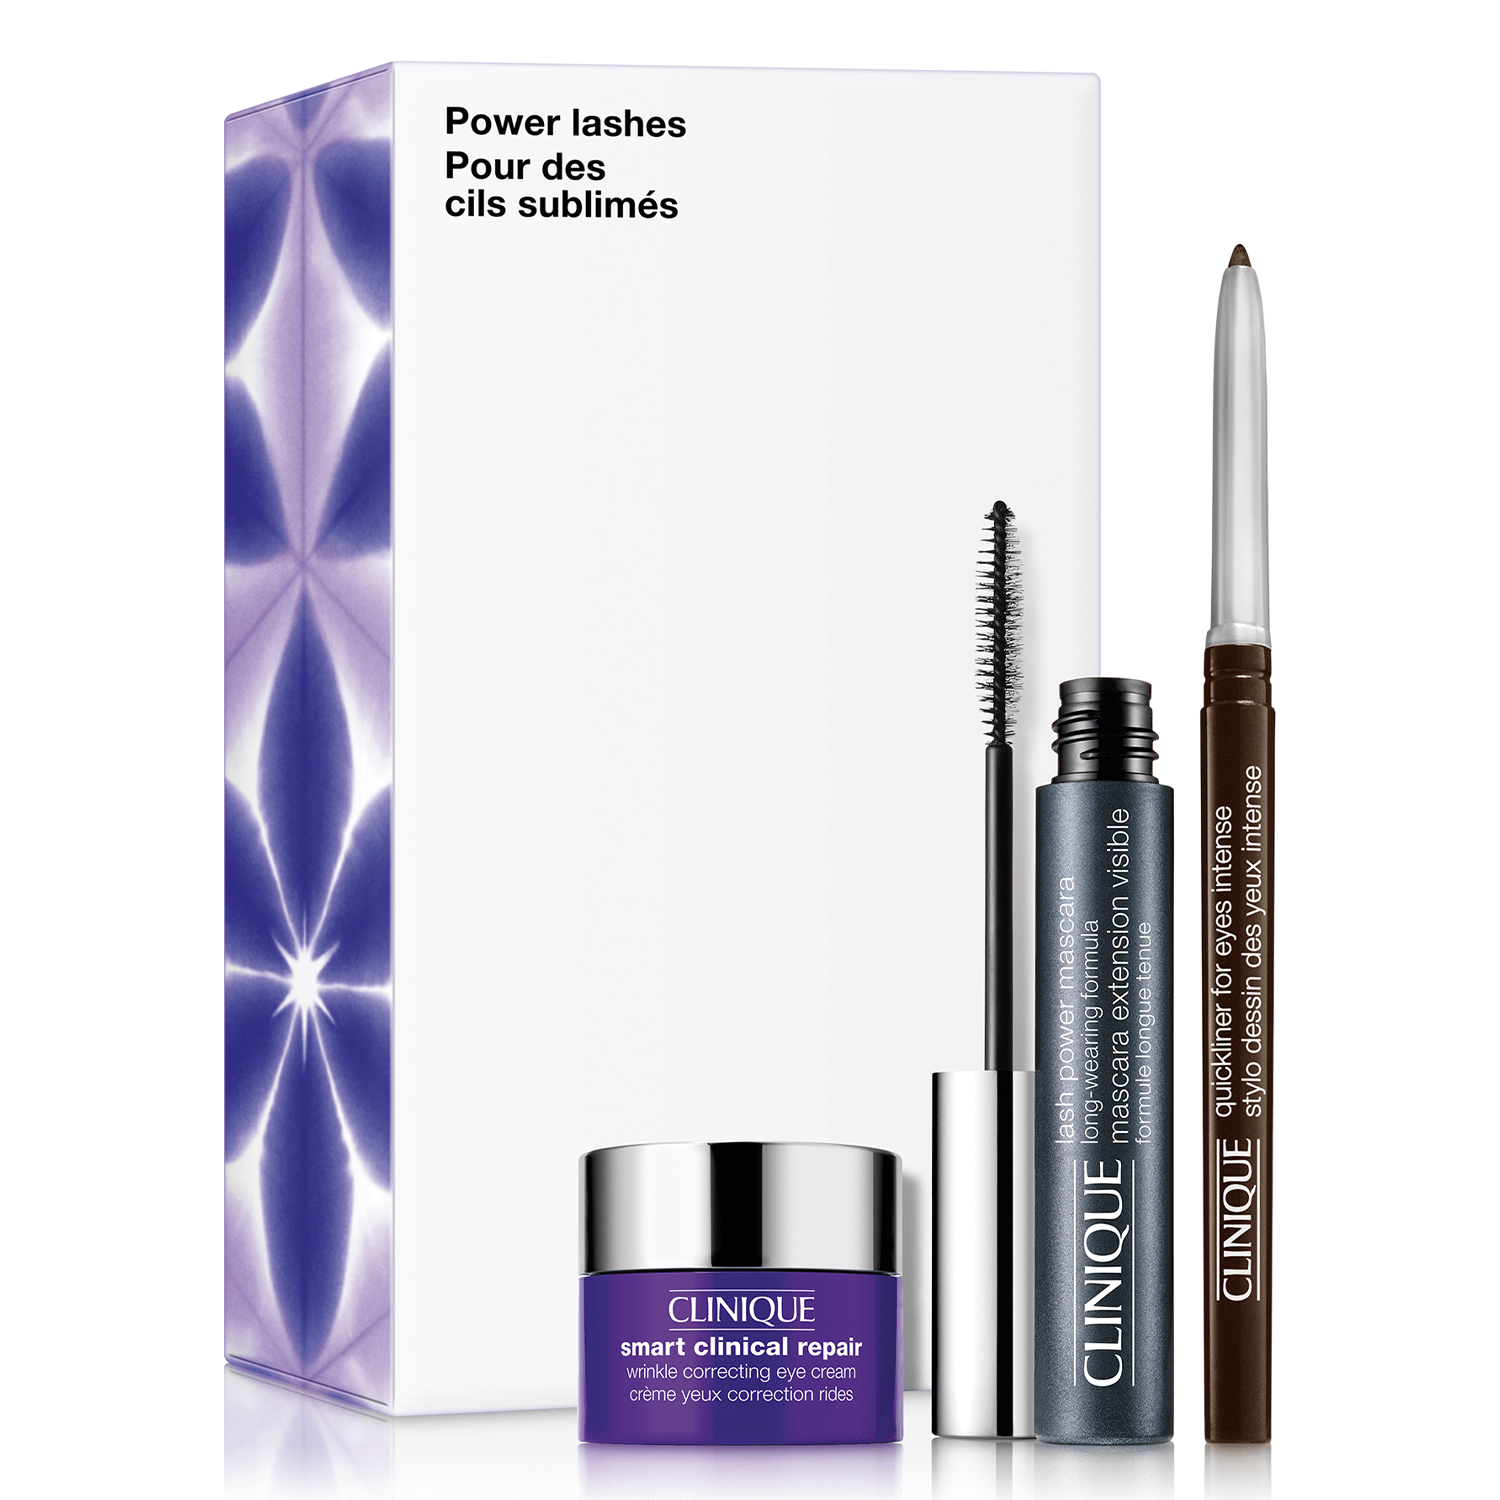 Product image from Clinique Set - Power Lashes Set